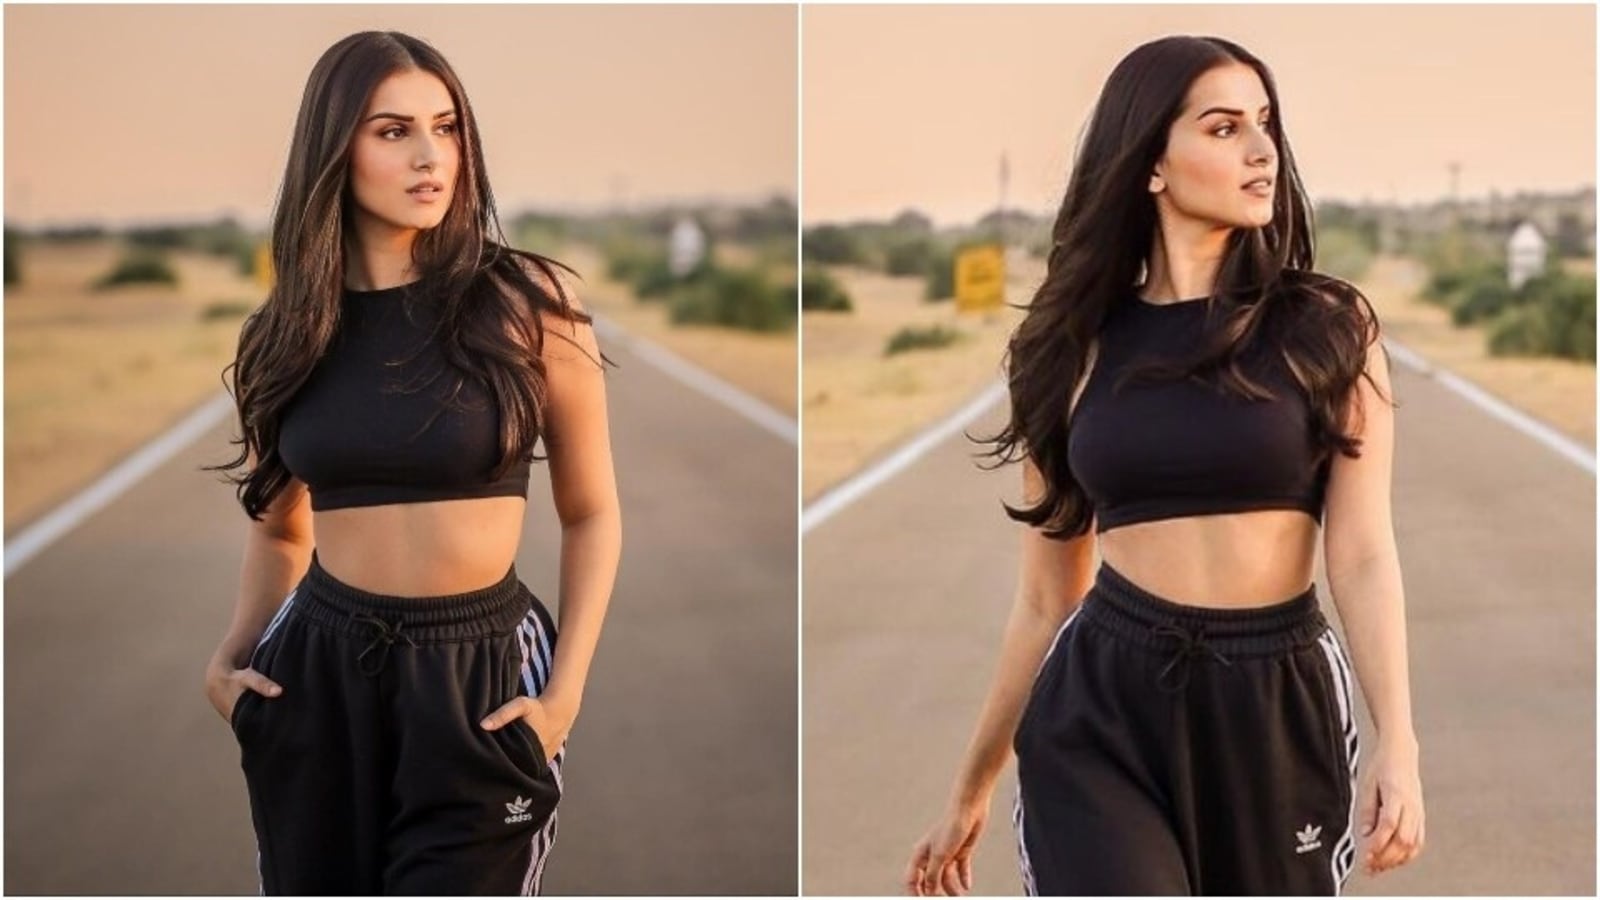 tara-sutaria-is-a-total-smokeshow-in-black-crop-top-and-joggers-set-as-she-takes-a-stroll-in-jaisalmer-all-pics-here